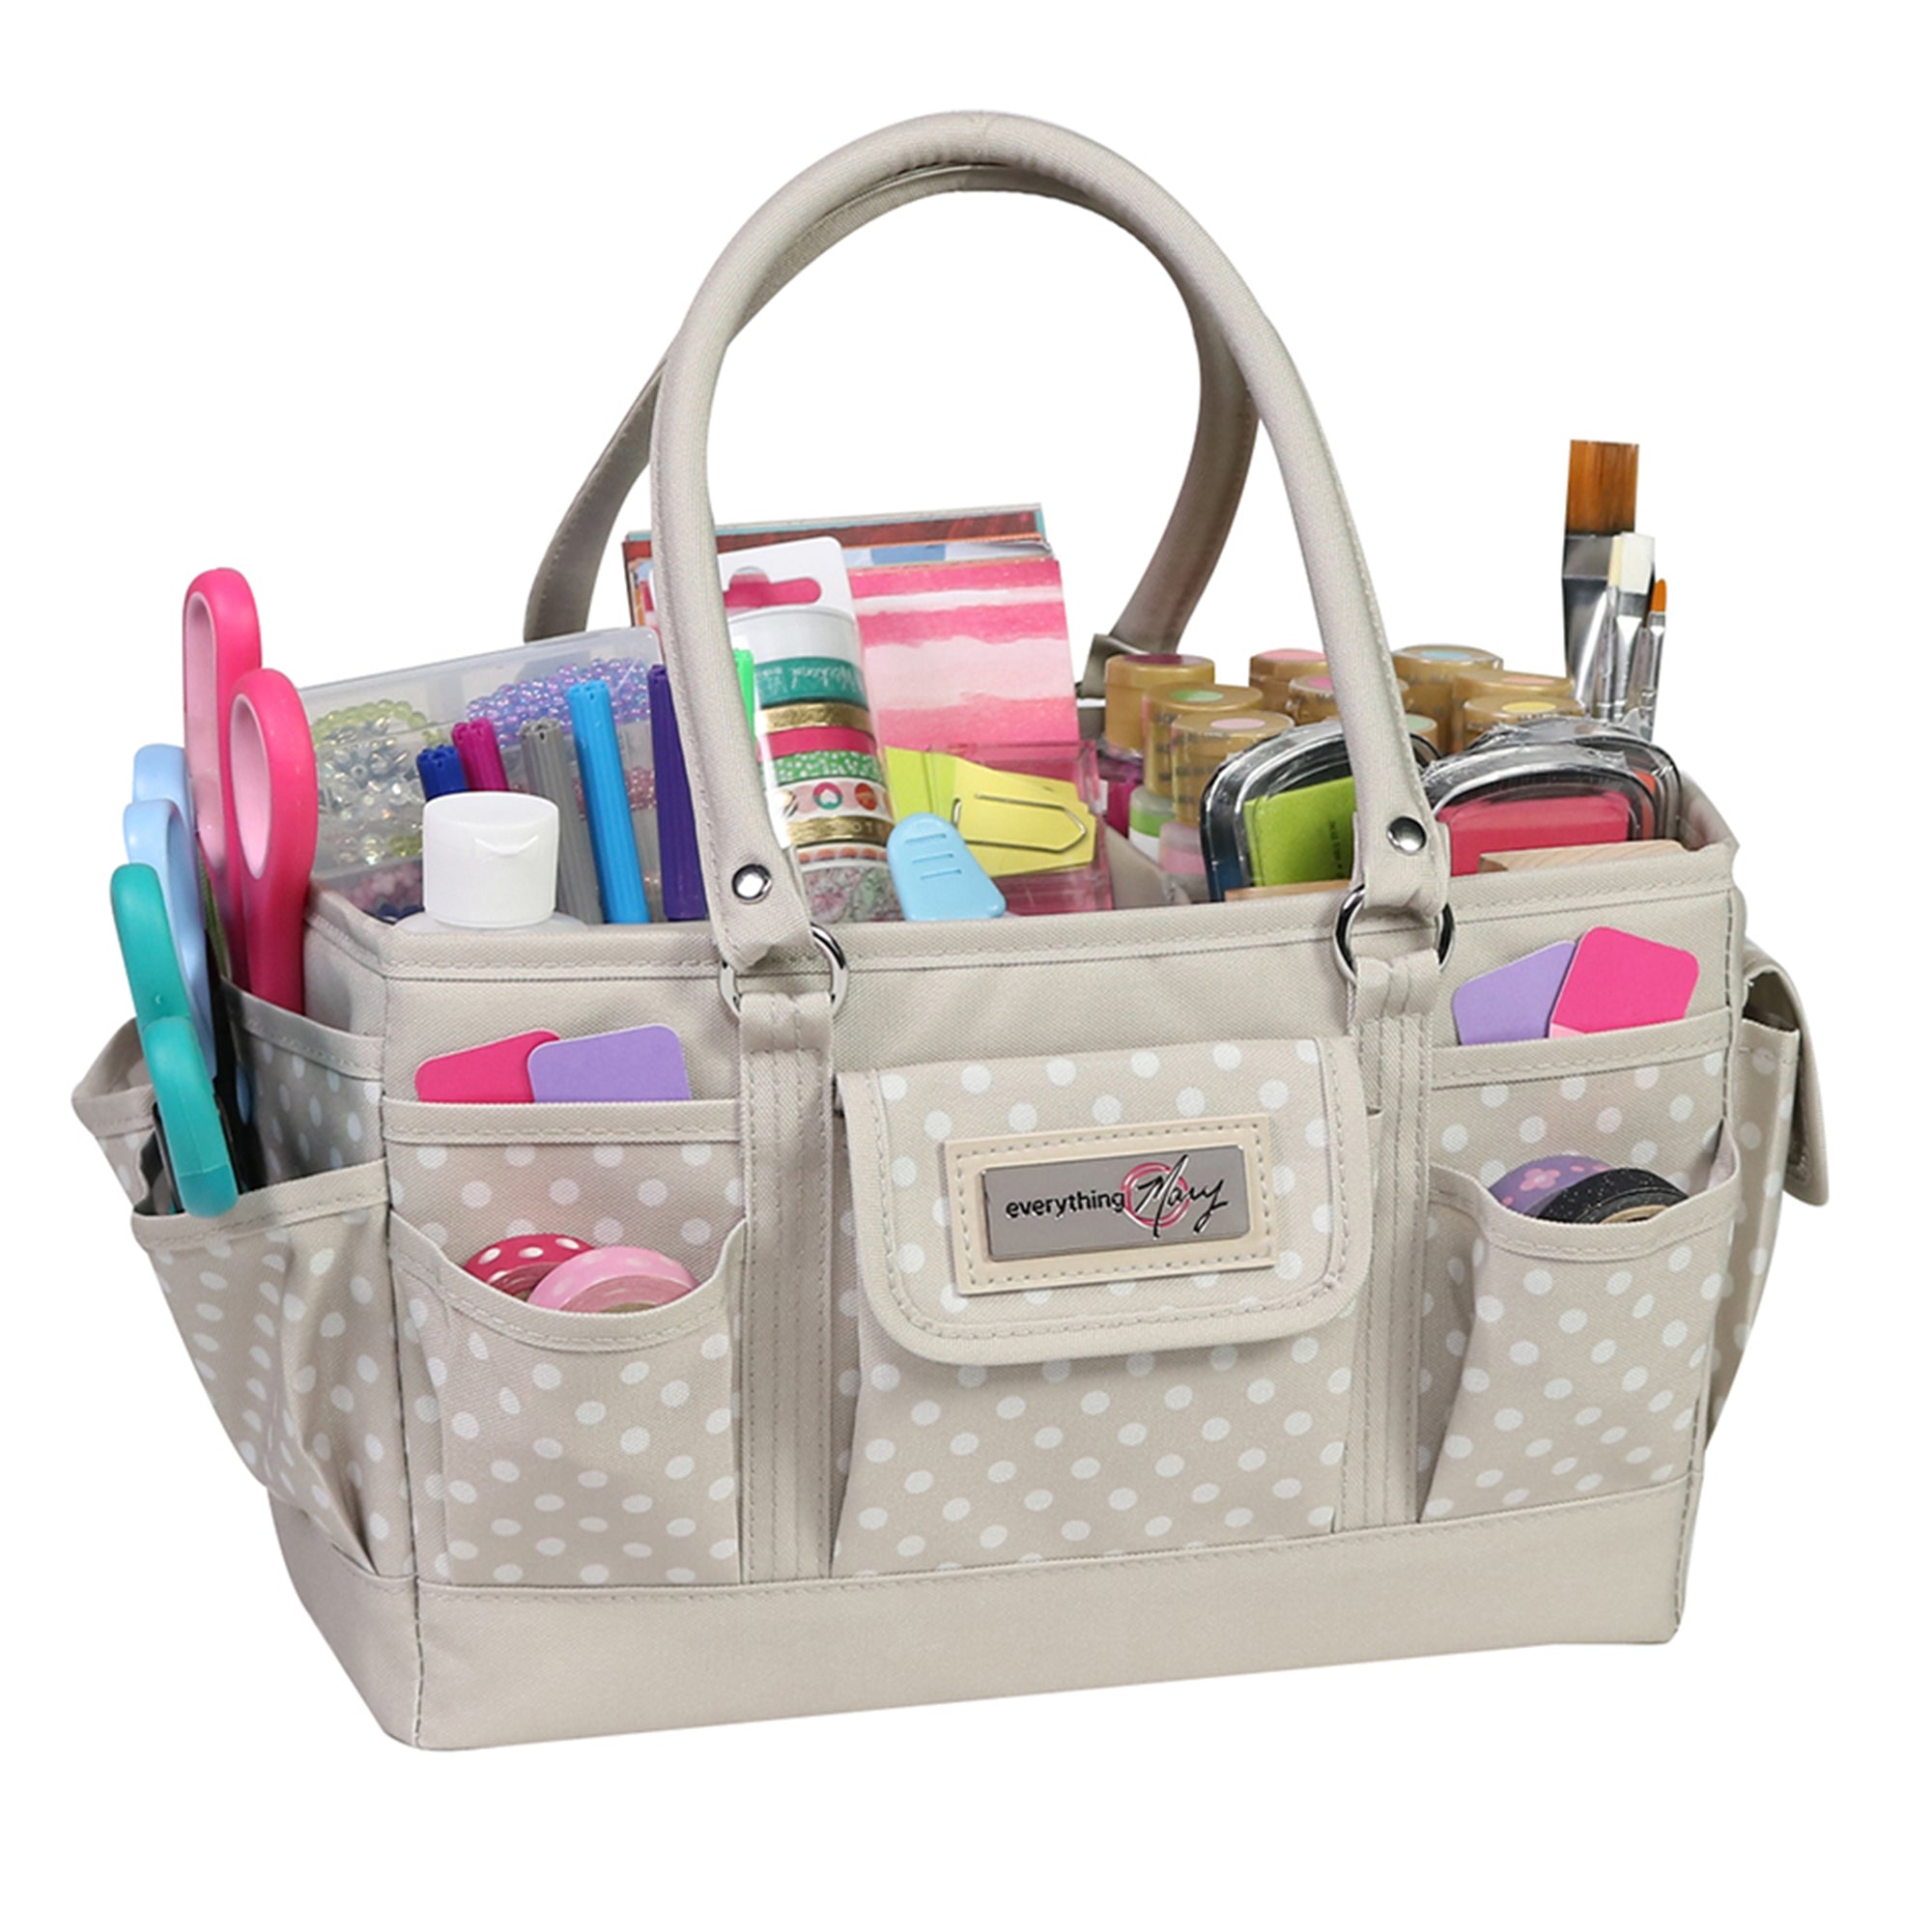 Office Tote Bag Organizer with Structured Bottom